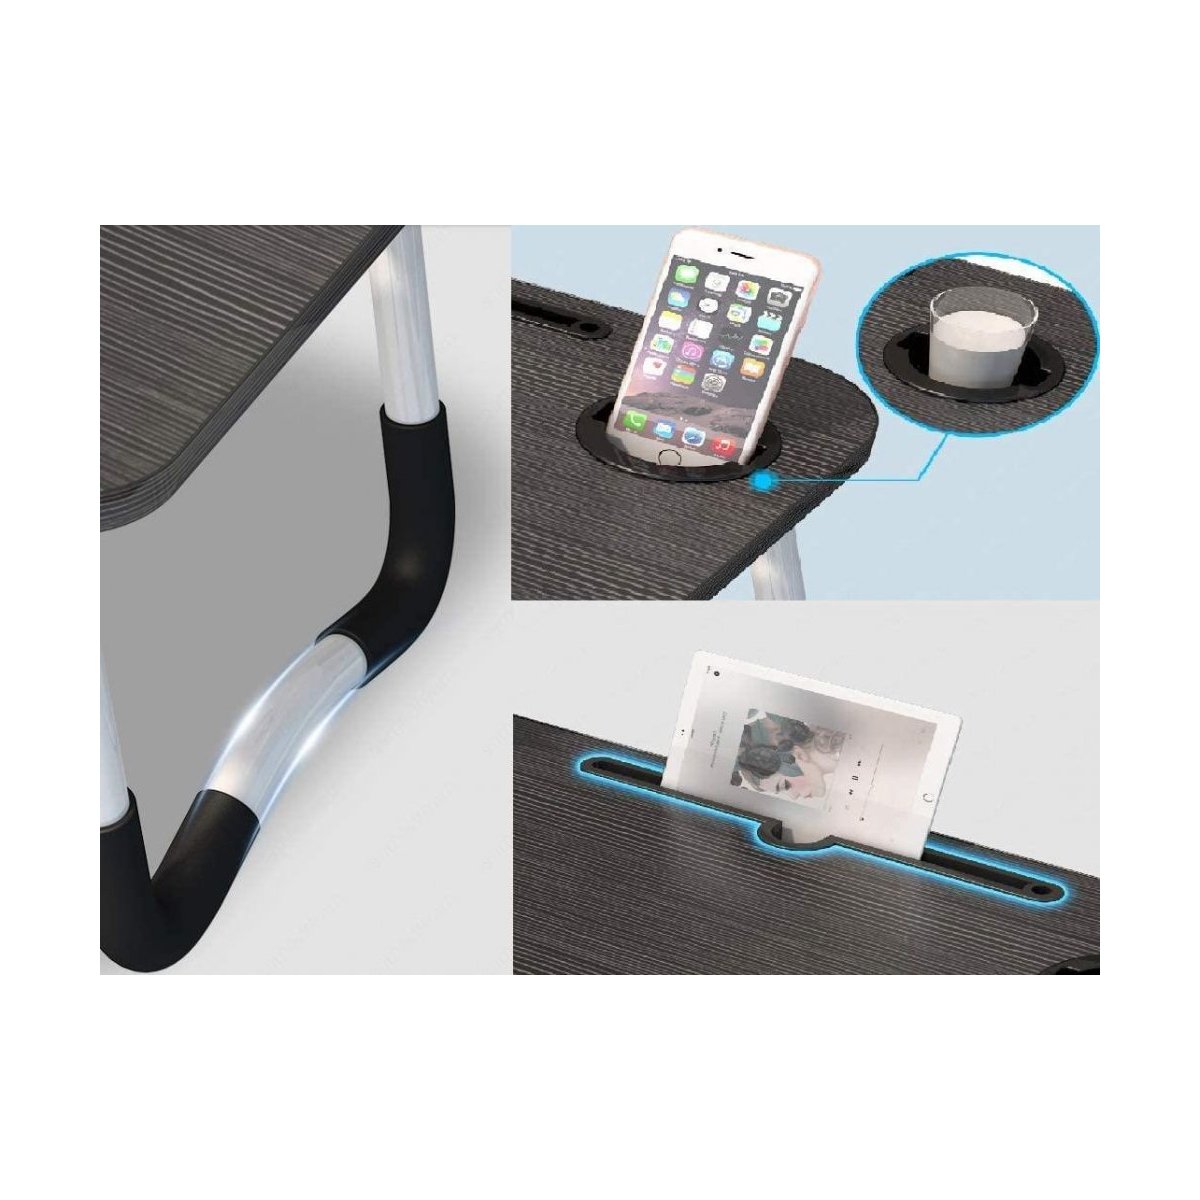 Folding Laptop Table Tray Desk with Cup Holder